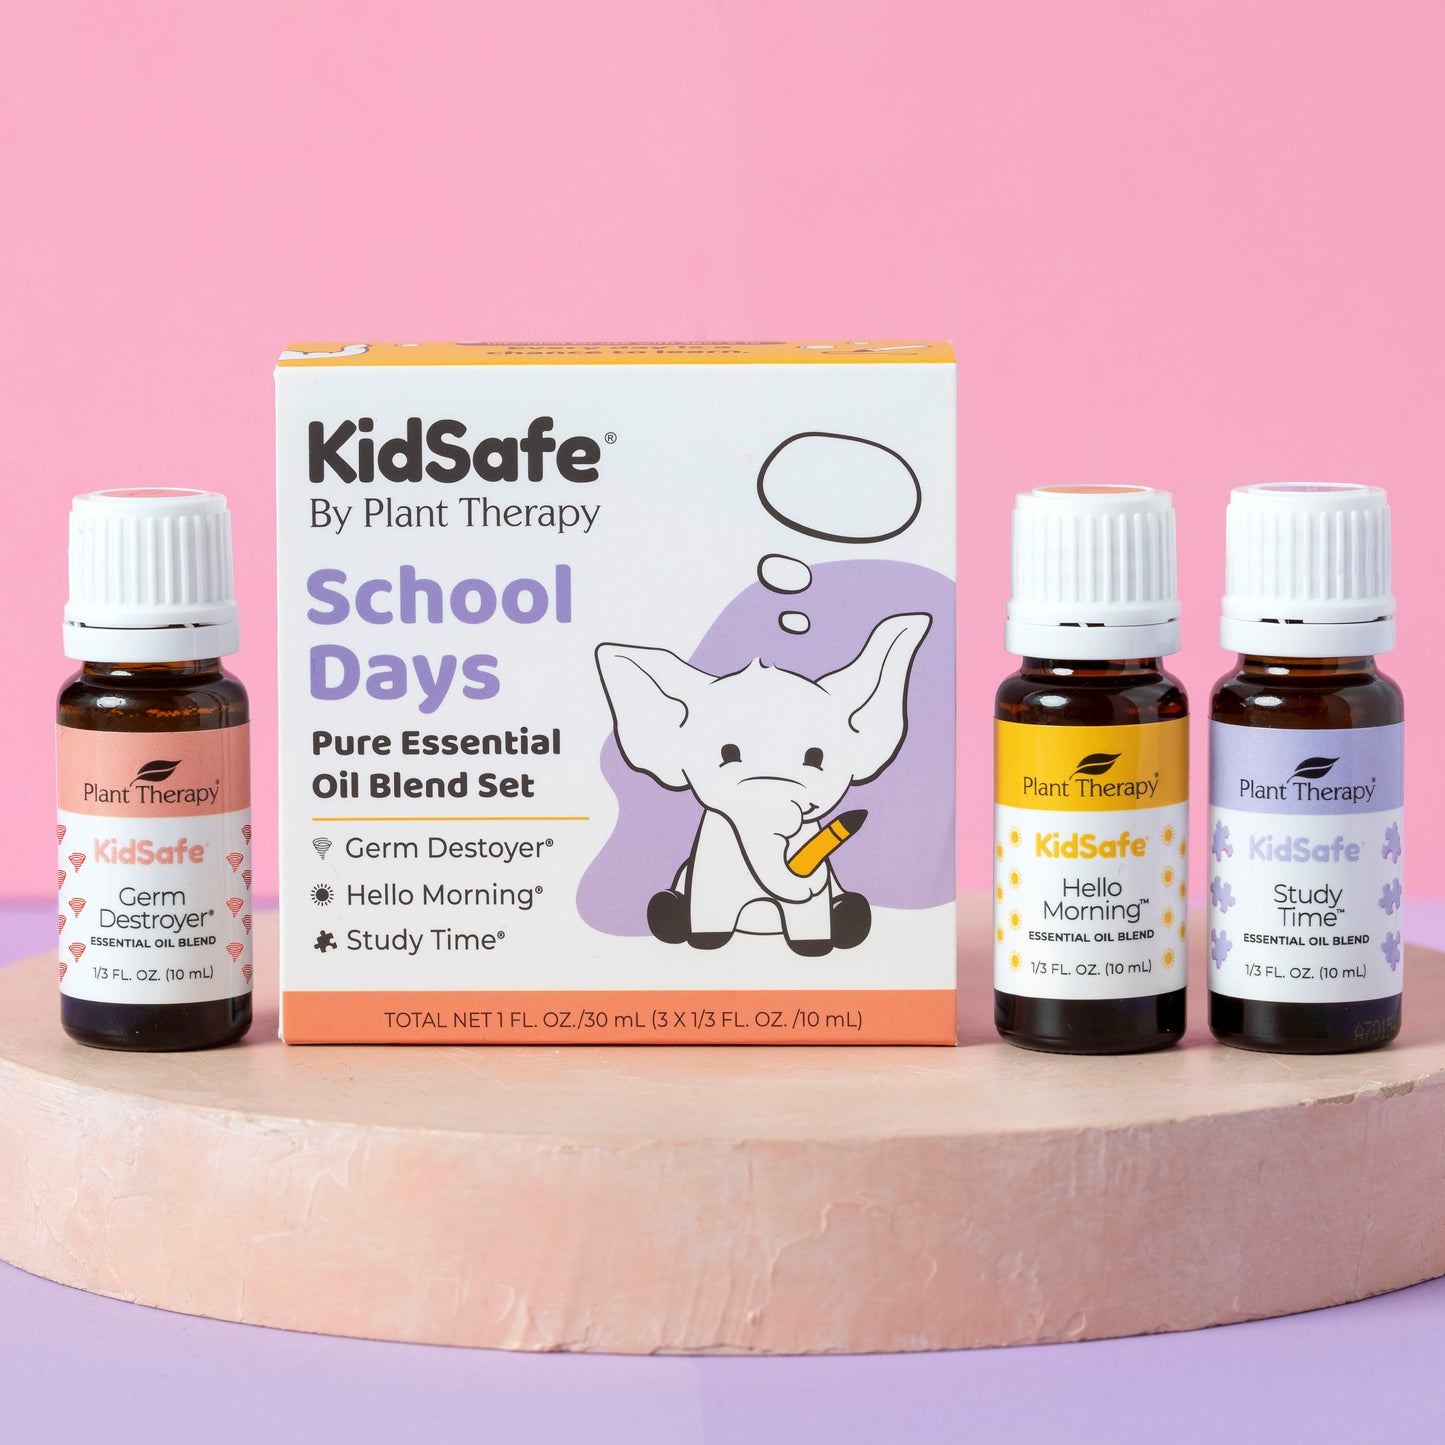 KidSafe School Days 3 Set image with bottles and box